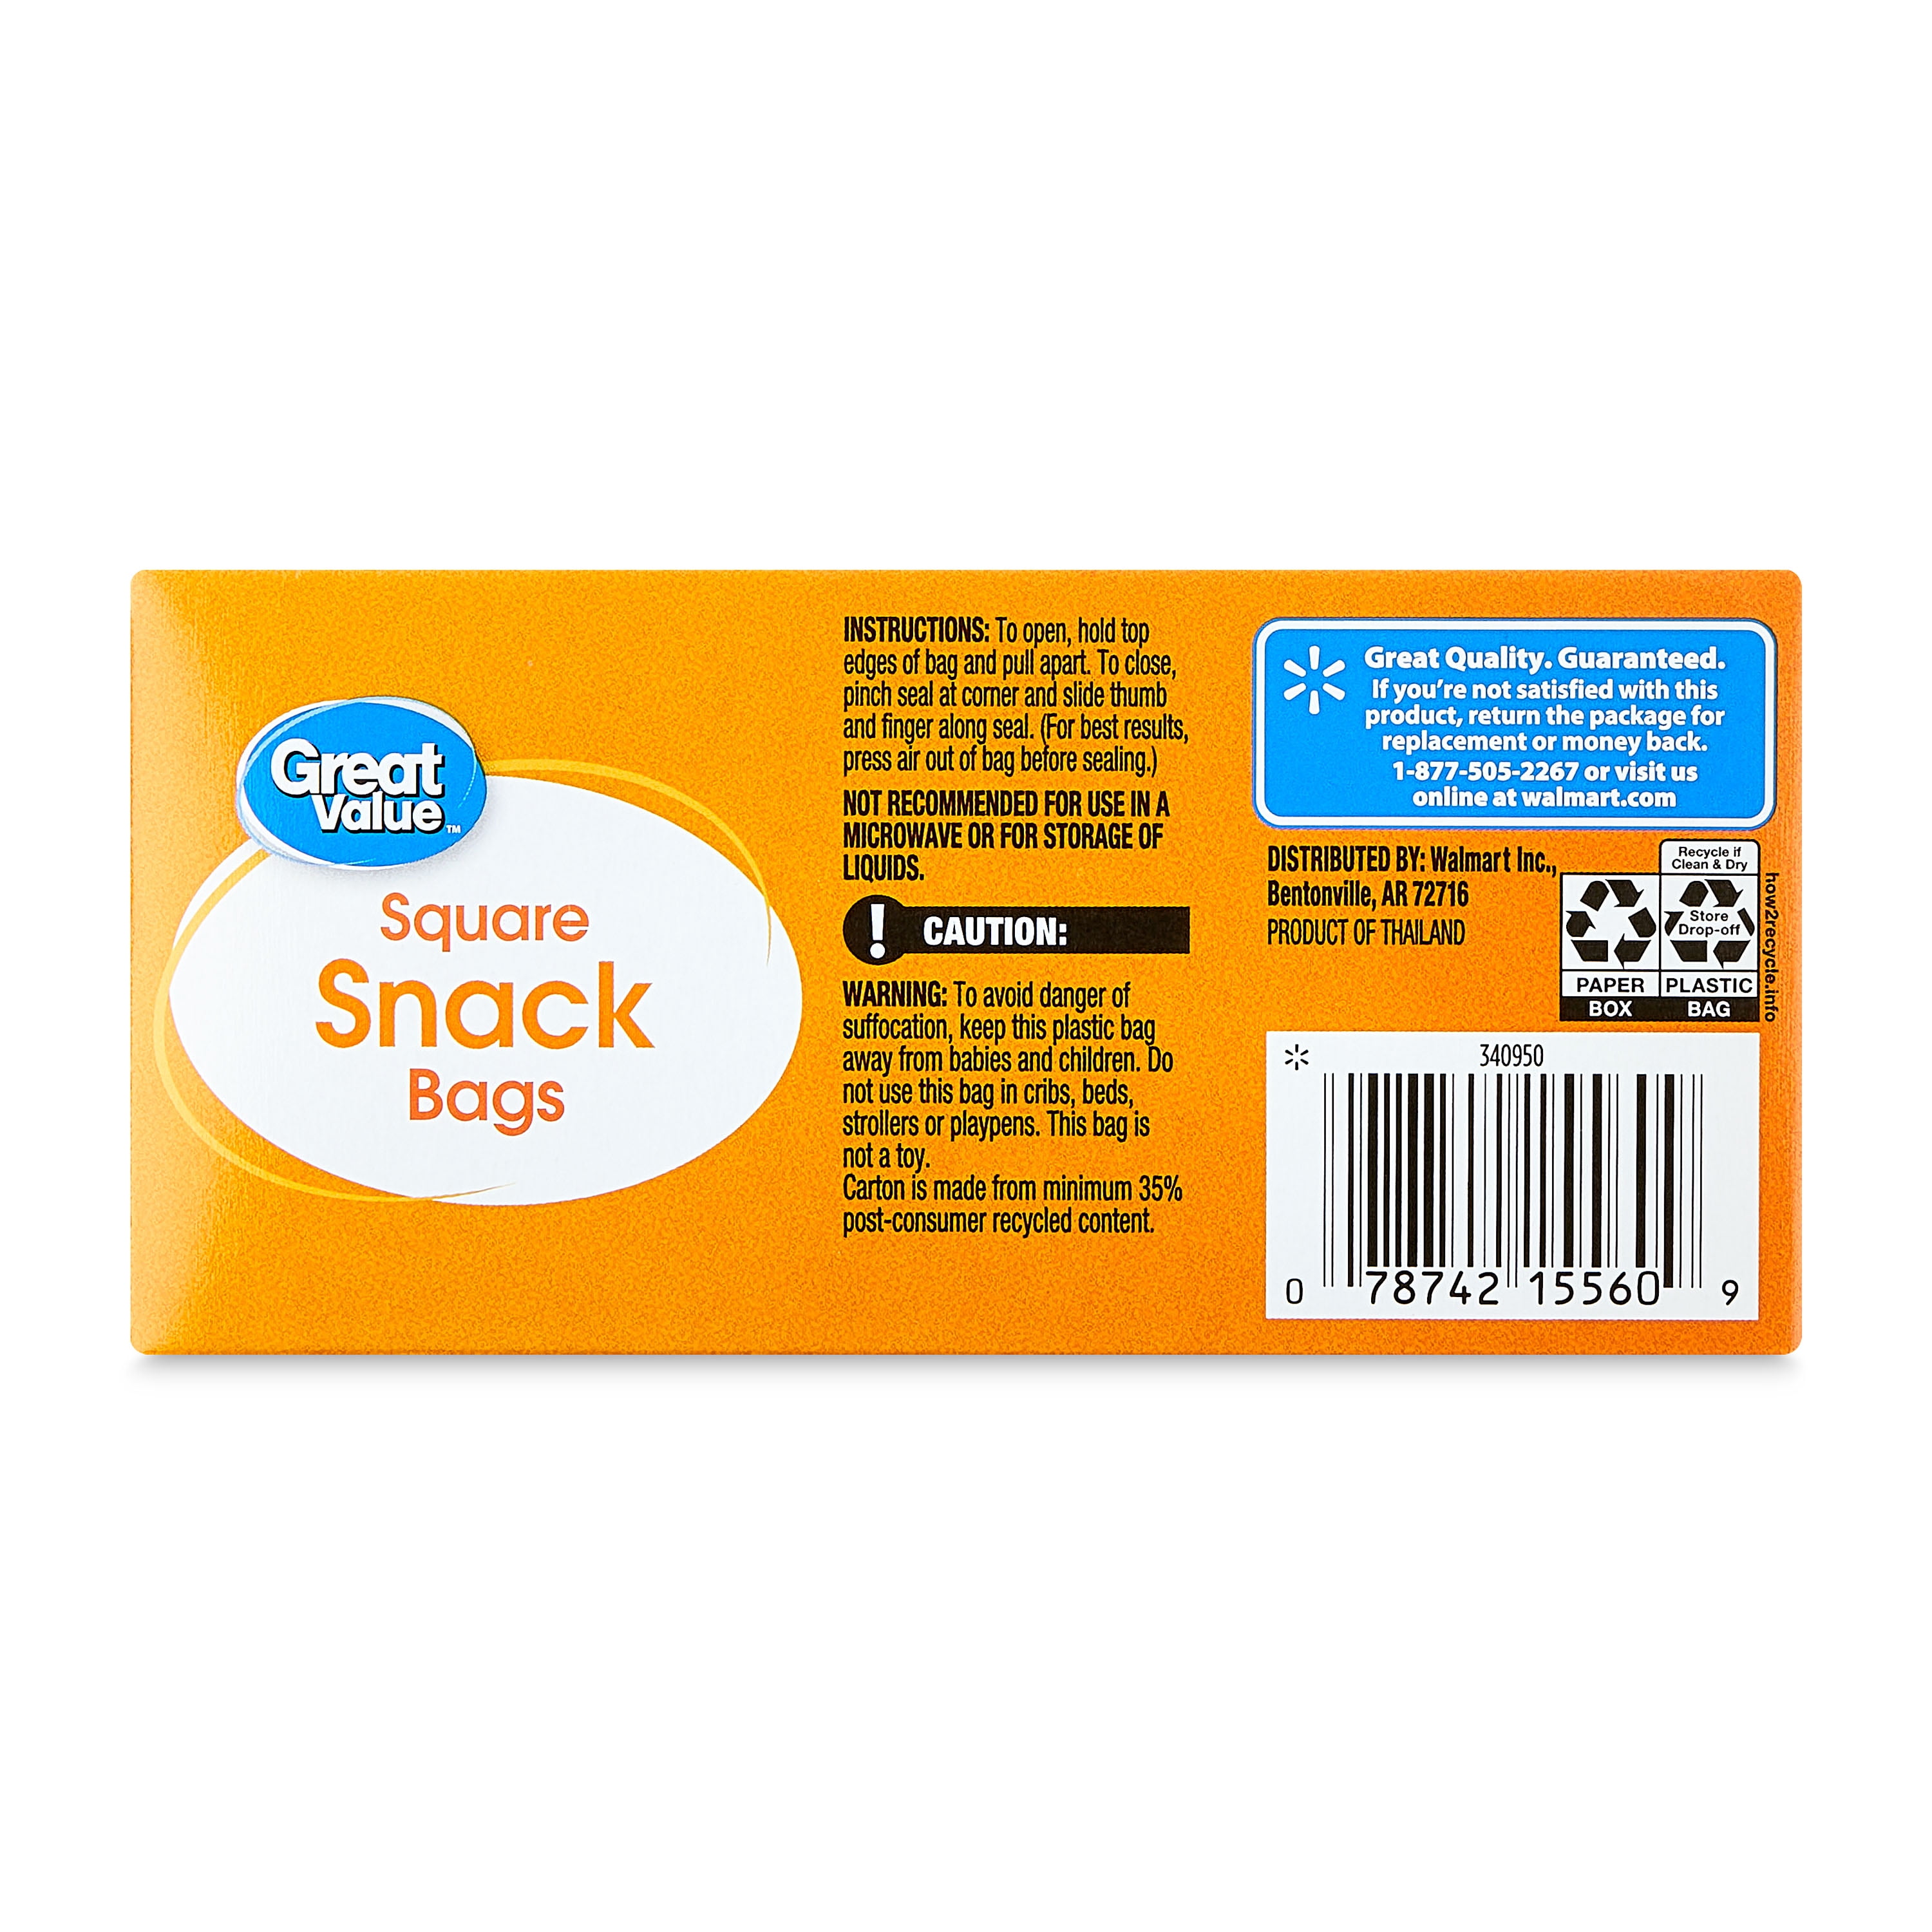 Great Value Fresh Seal Zipper Square Snack Bags, 200 Count